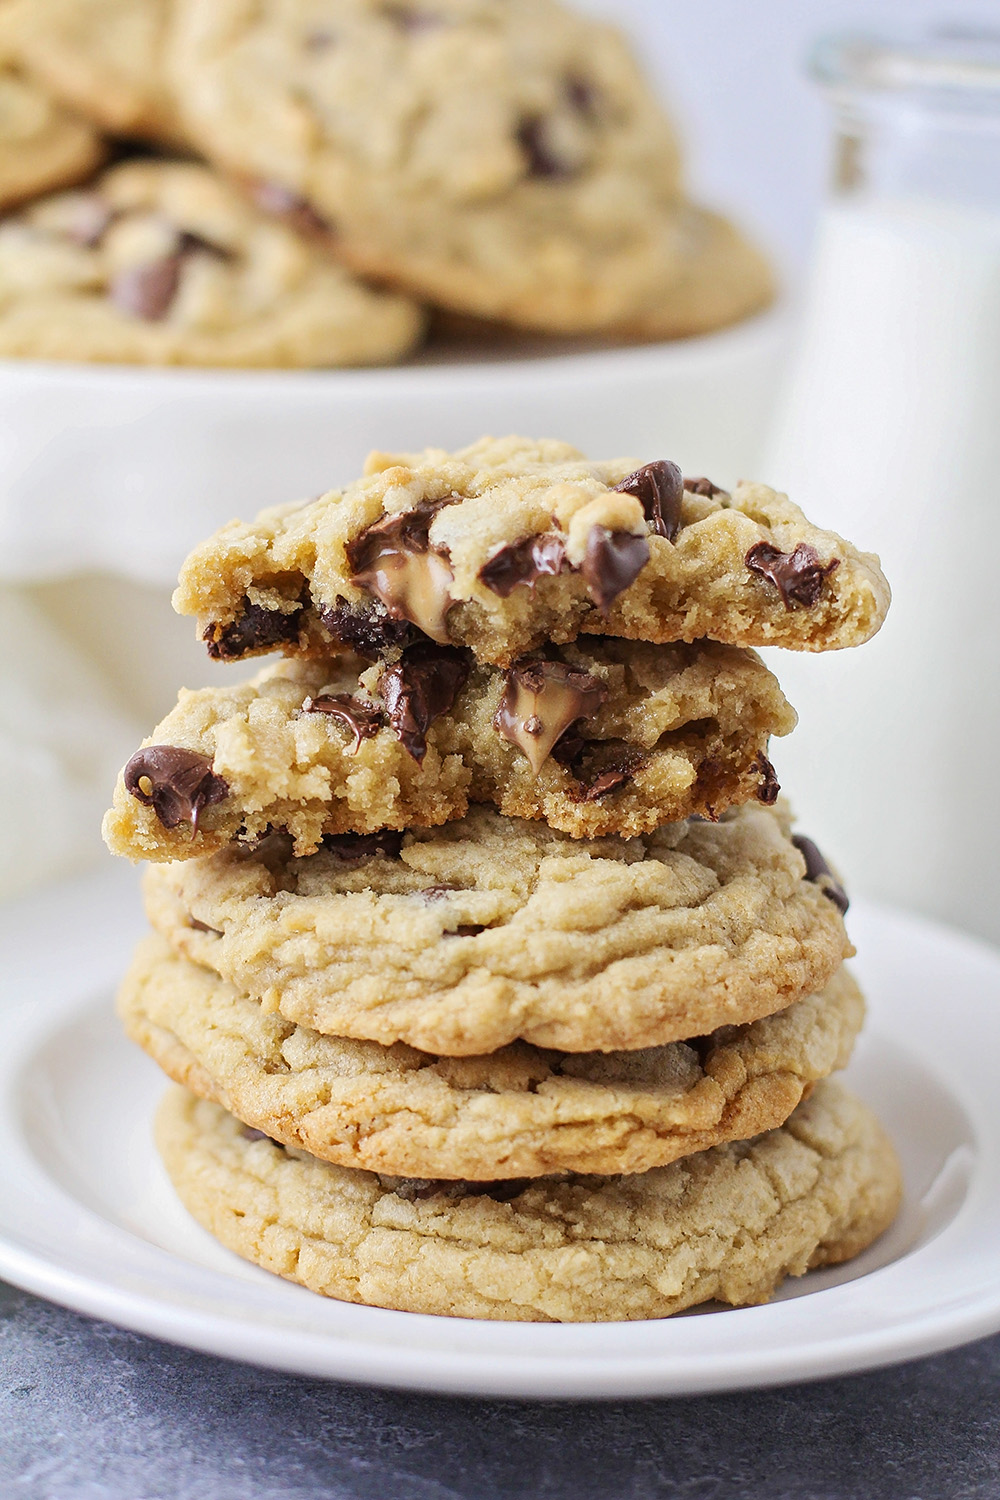 This is hands down the BEST chocolate chip cookie recipe! These cookies are crisp around the edges, gooey in the middle, and completely delicious!